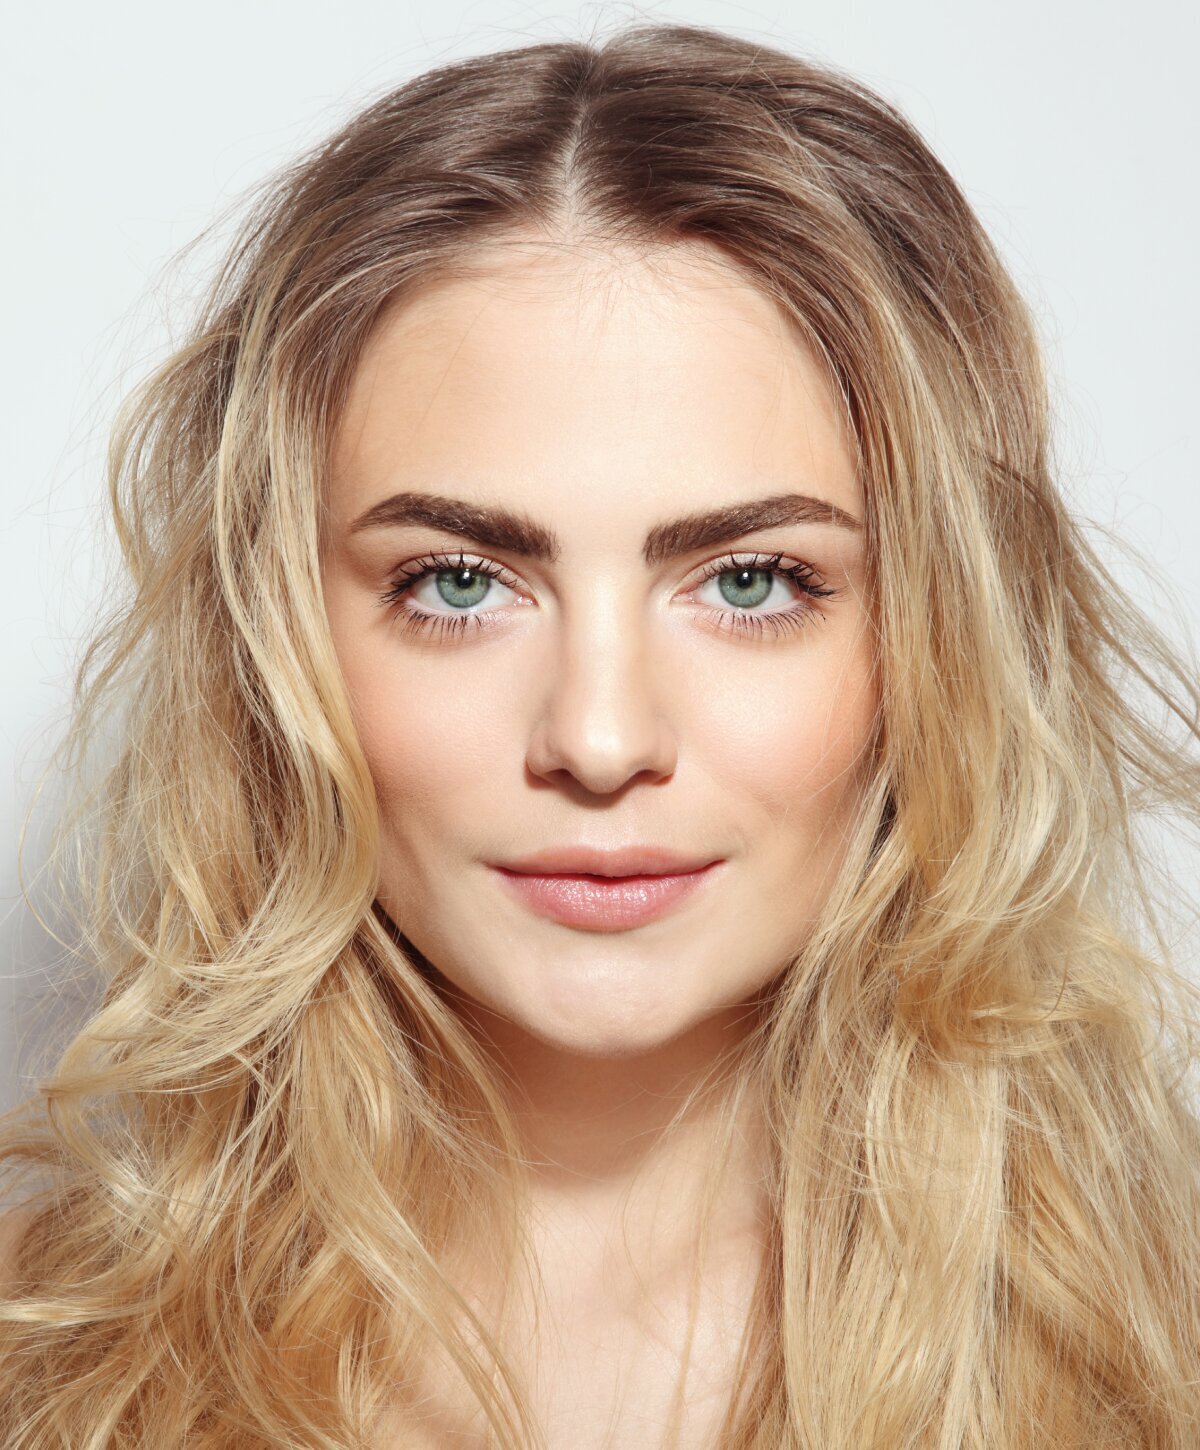 Londonderry threadlifts model with blonde hair